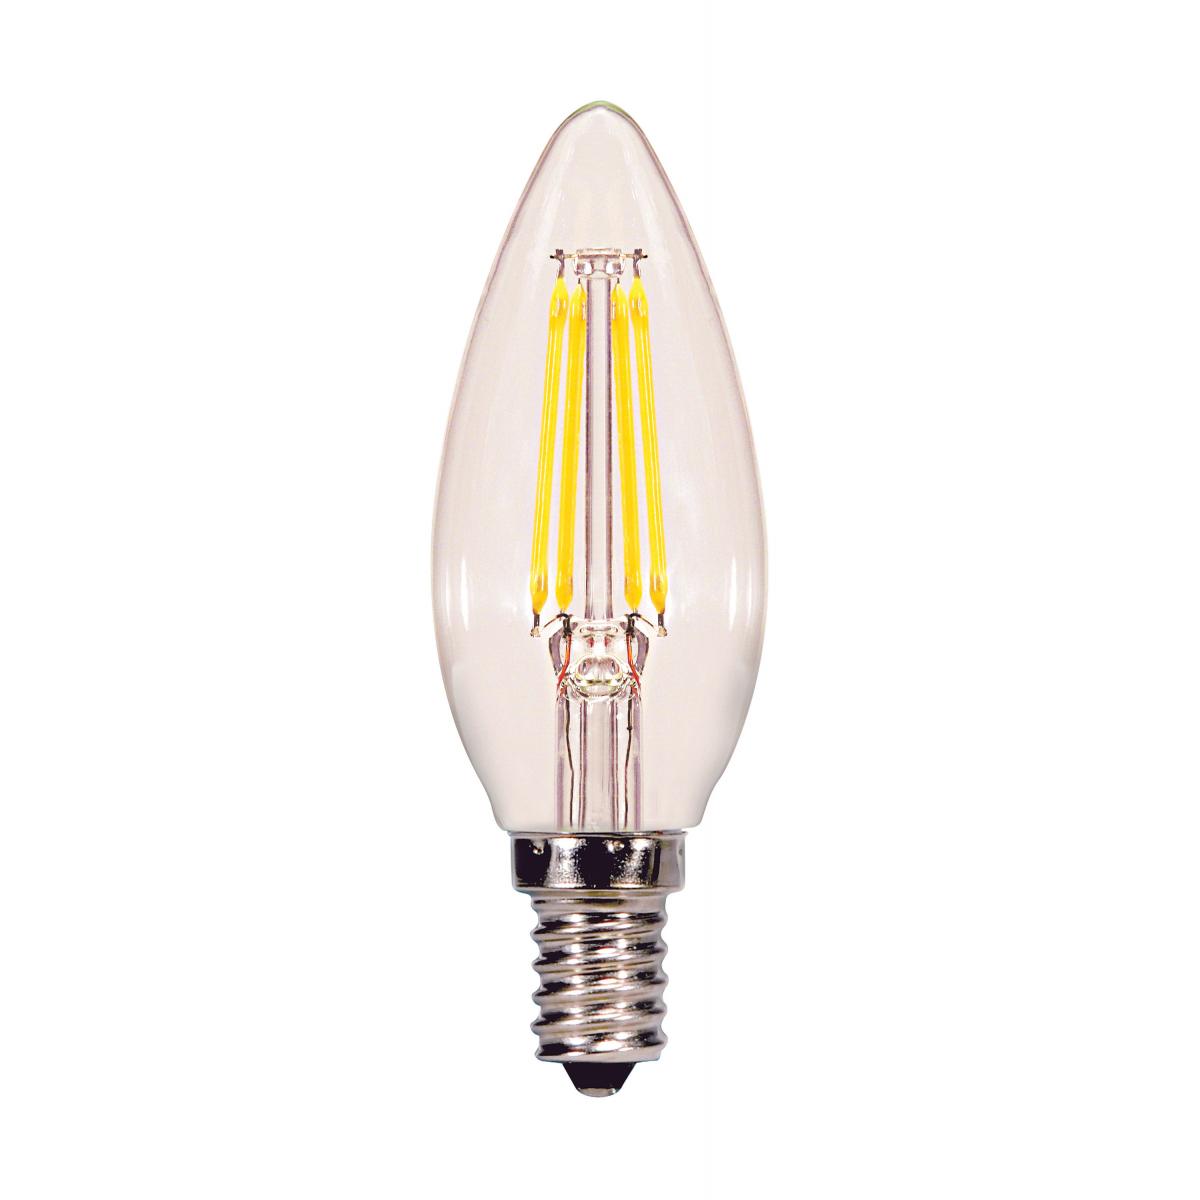 Replacement for Satco S11370 4.5 Watt C11 LED Clear Candelabra base 3000K 360 Lumens 120 Volt - NOW S21265